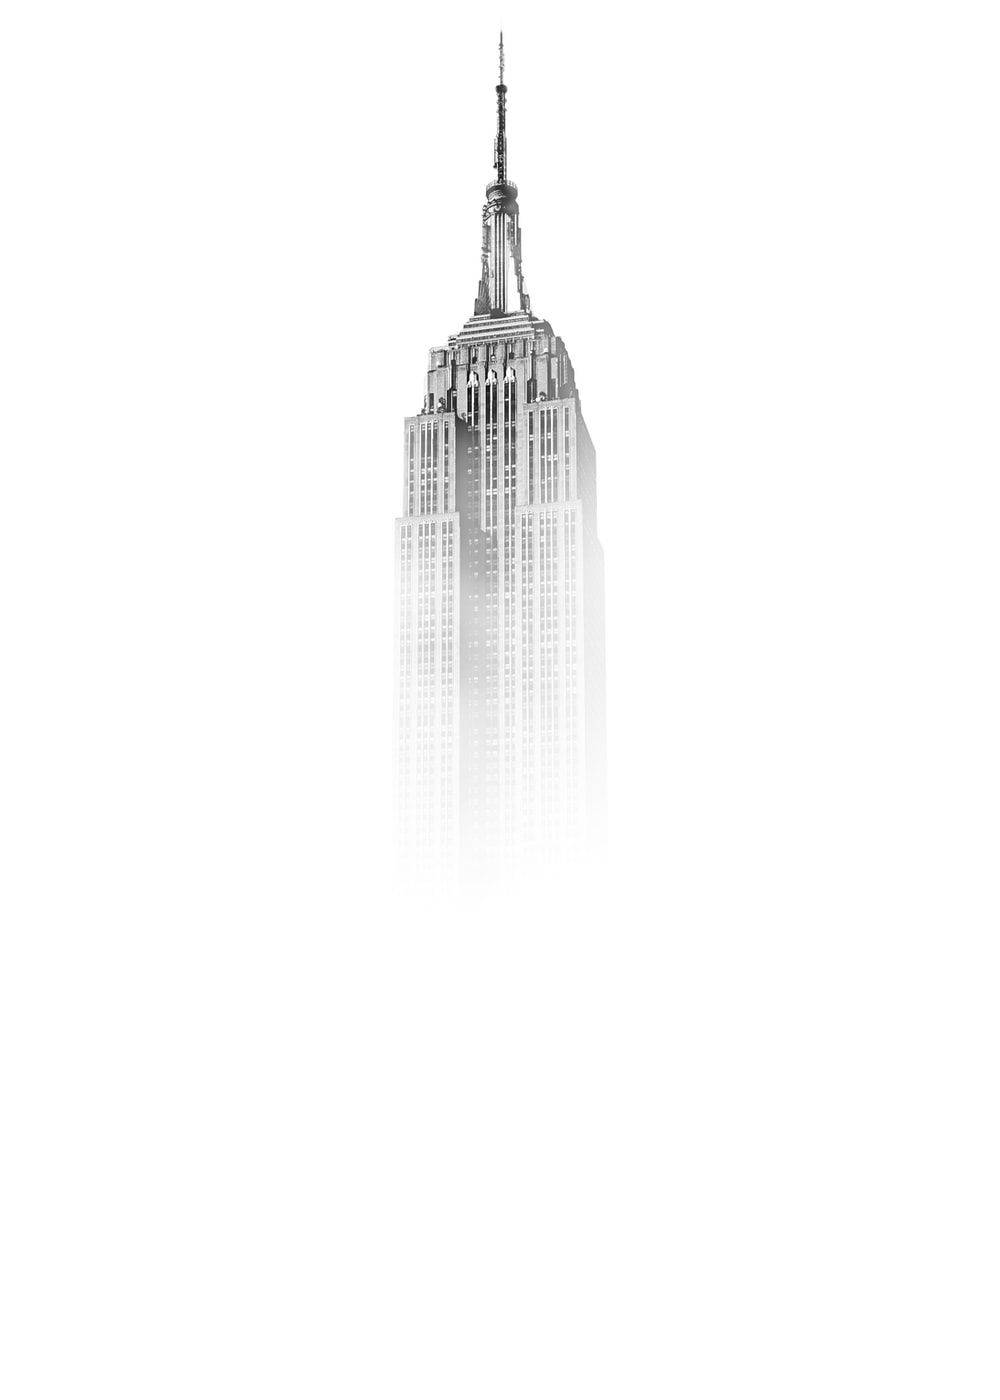 Blank White Empire State Building Faded Background